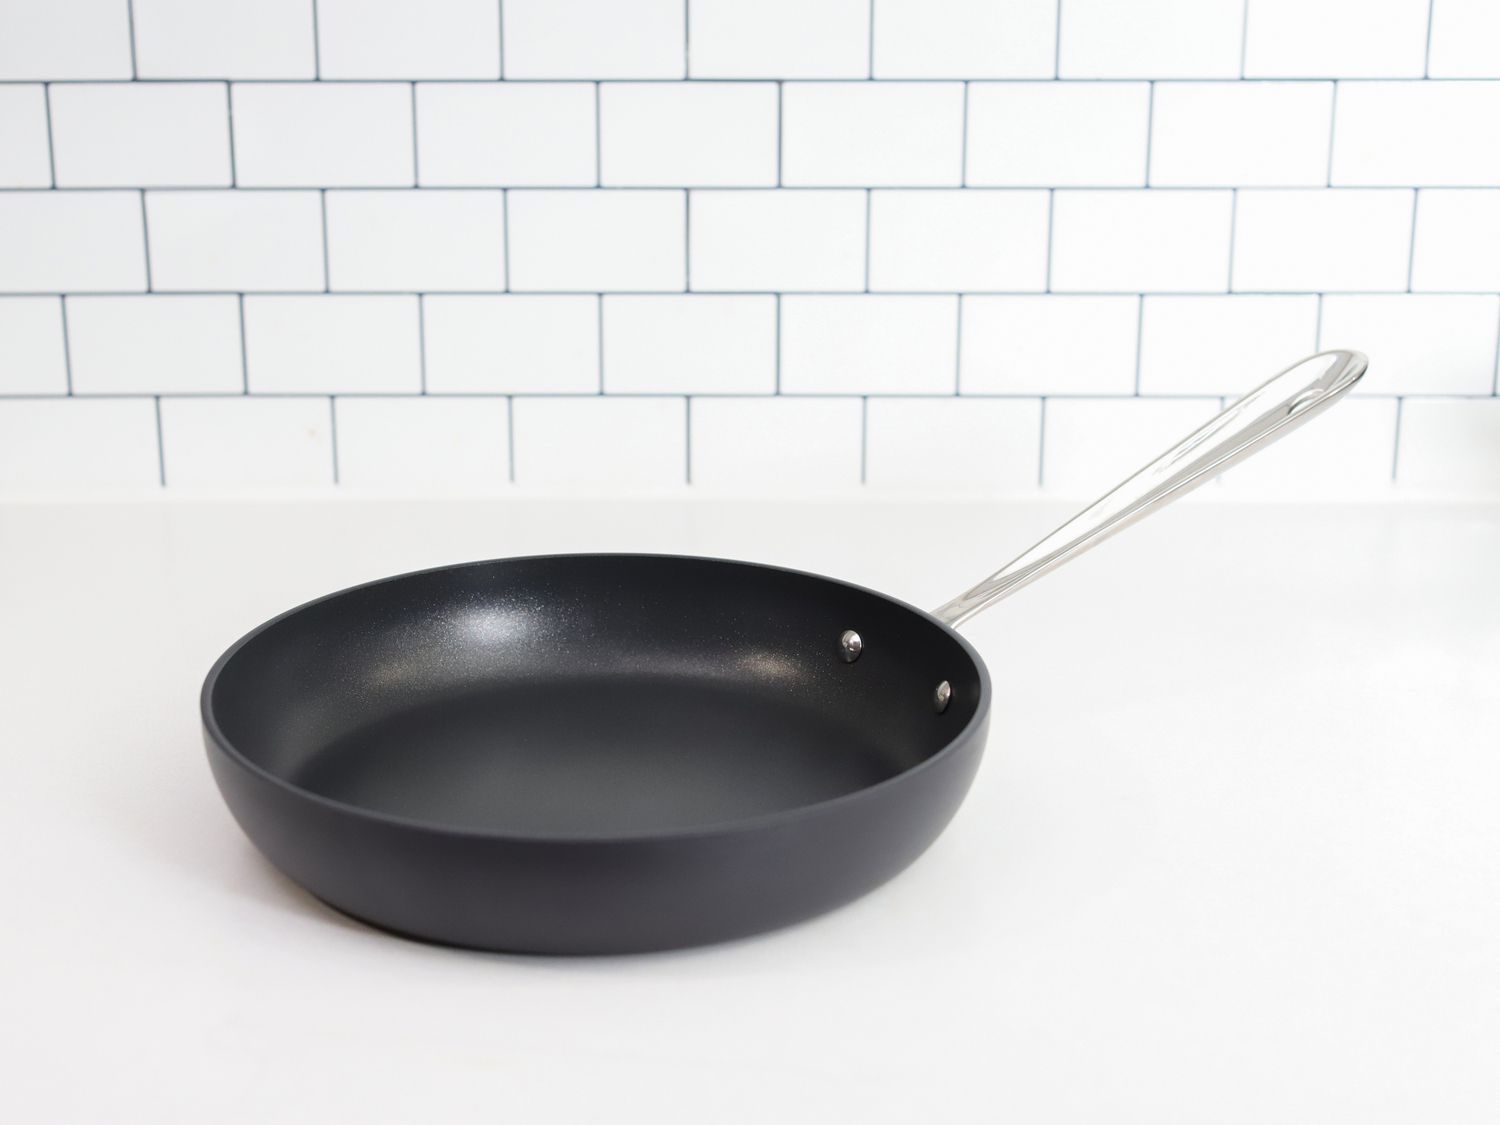 the all-clad nonstick skillet sitting on a white countertop with a white subway tile background behind it